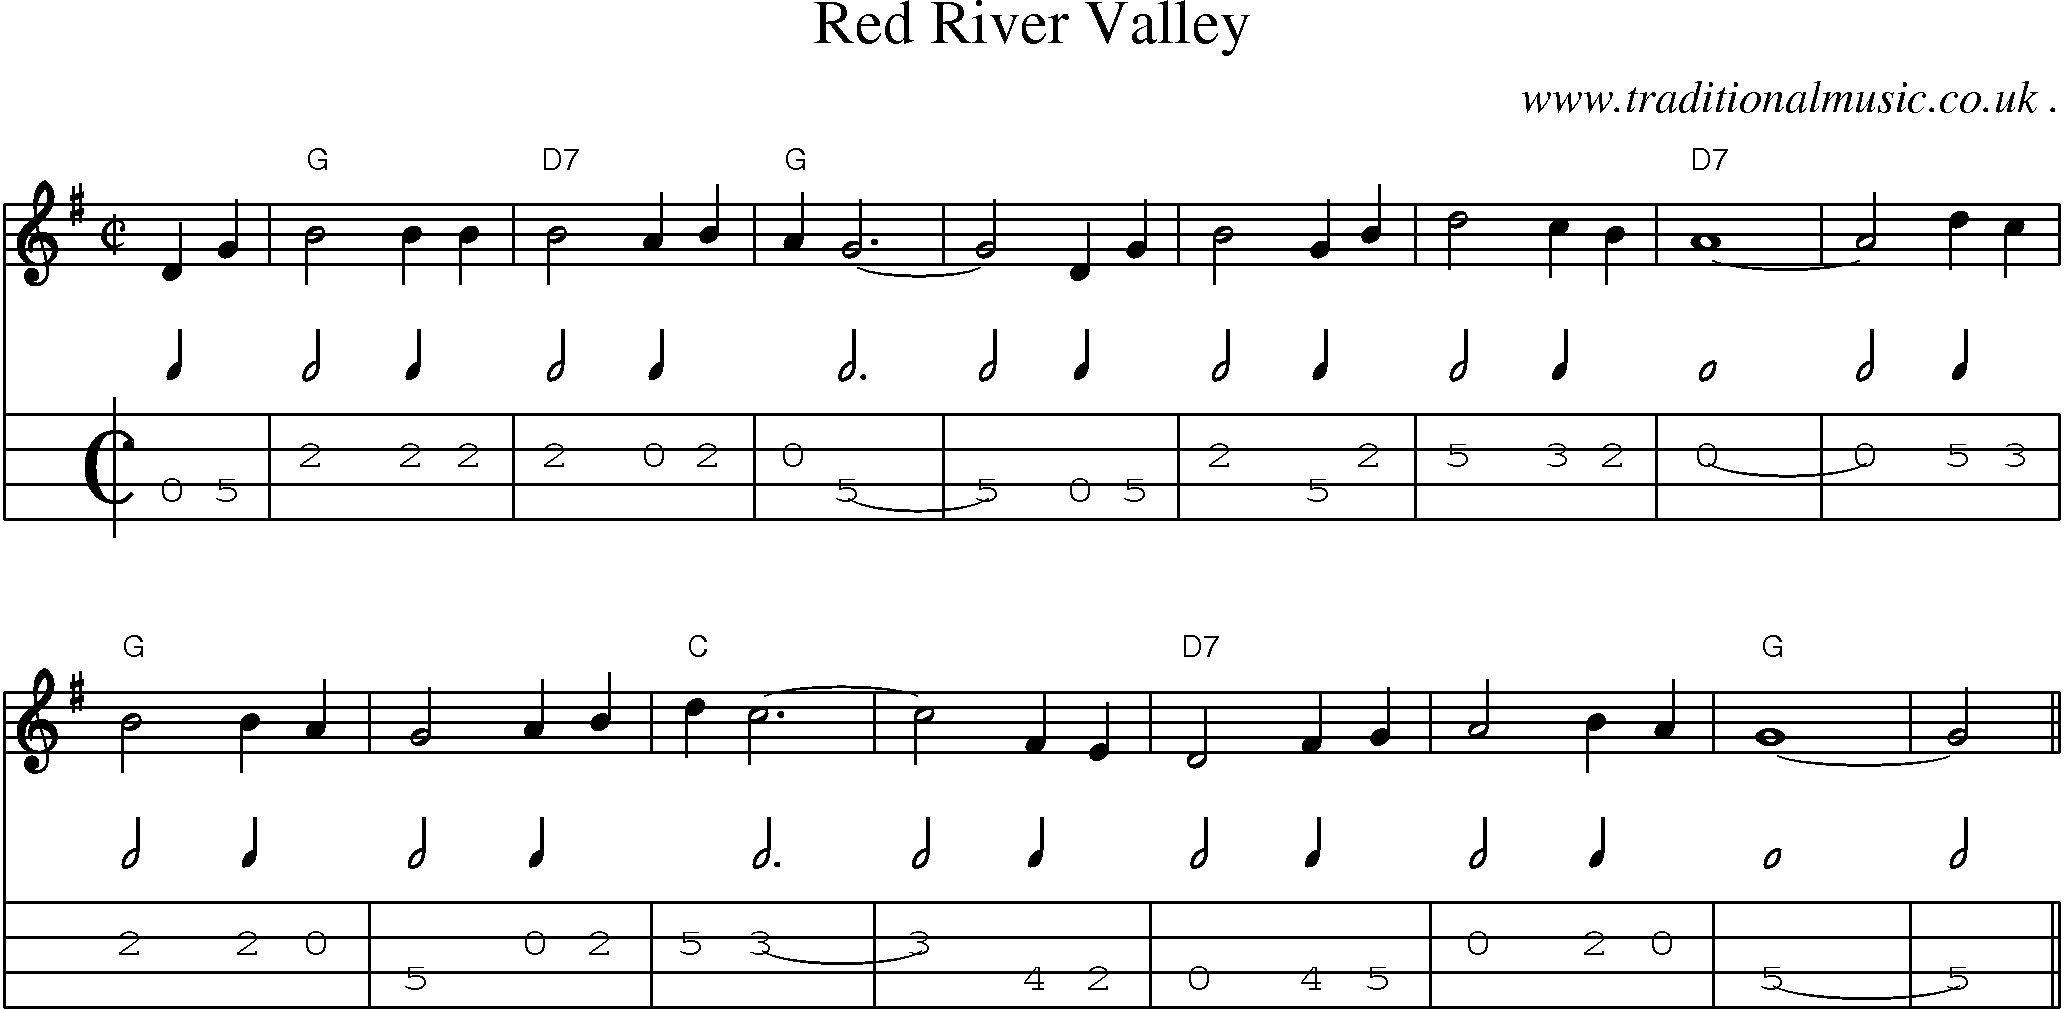 Music Score and Guitar Tabs for Red River Valley